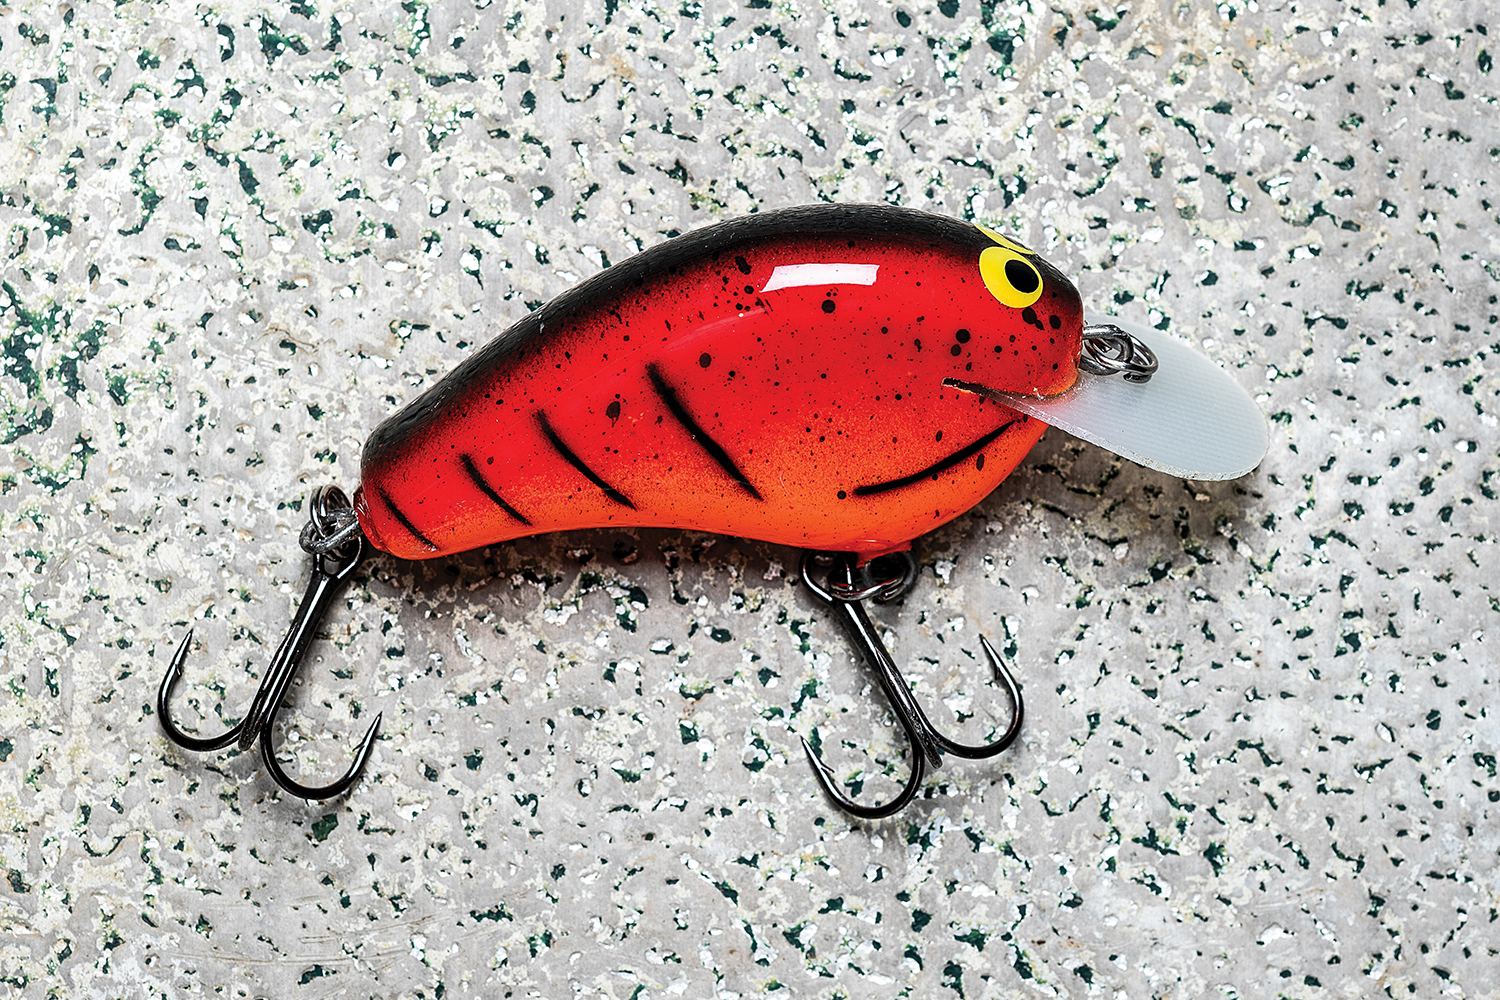 The Million Dollar Lure-A boy's first hand-made lure sparked a dream fishing  lure business